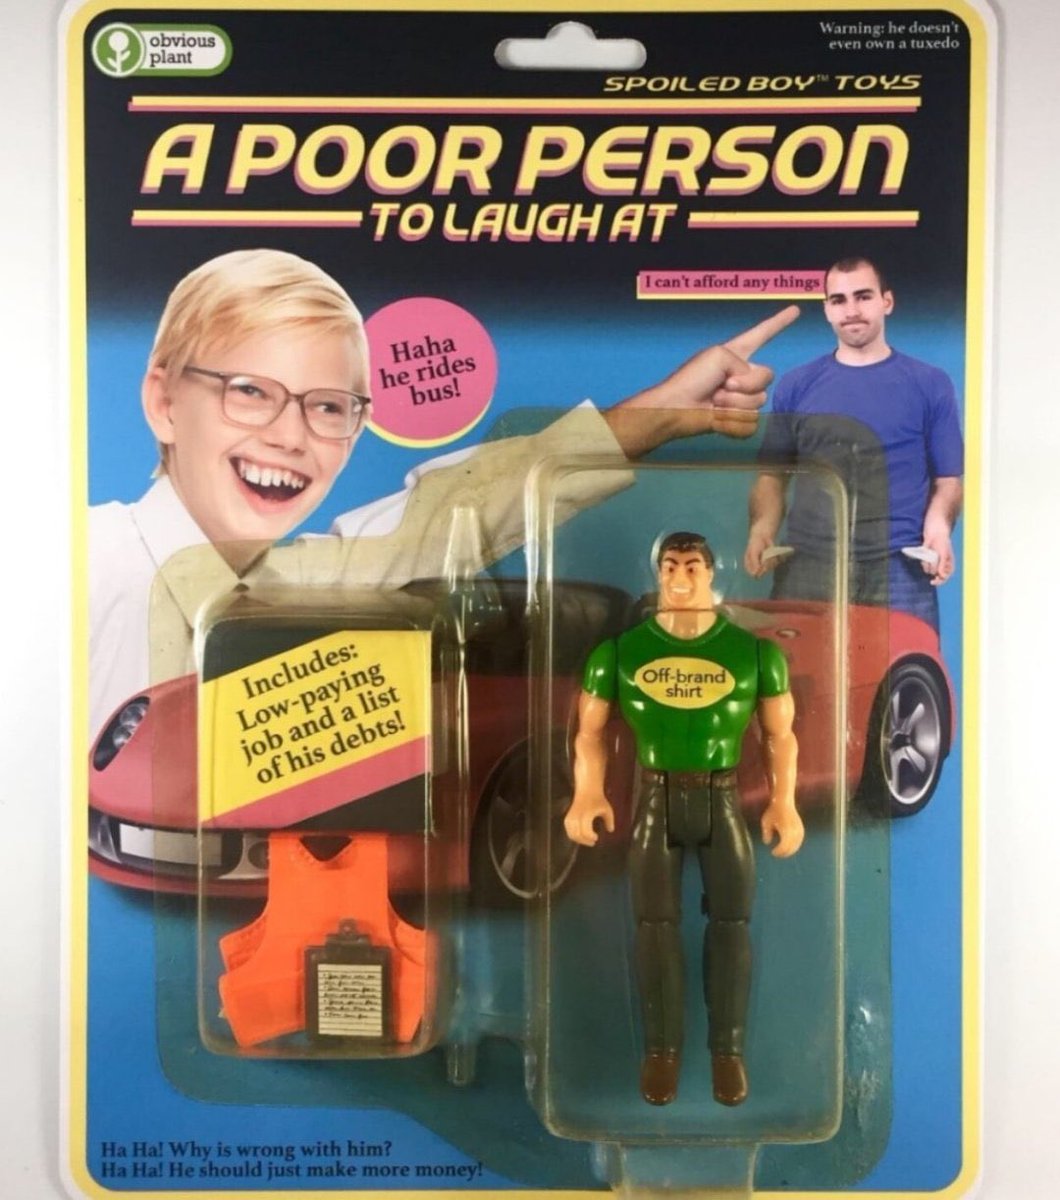 I have just commissioned my own lifelike action figure Thanks crypto!